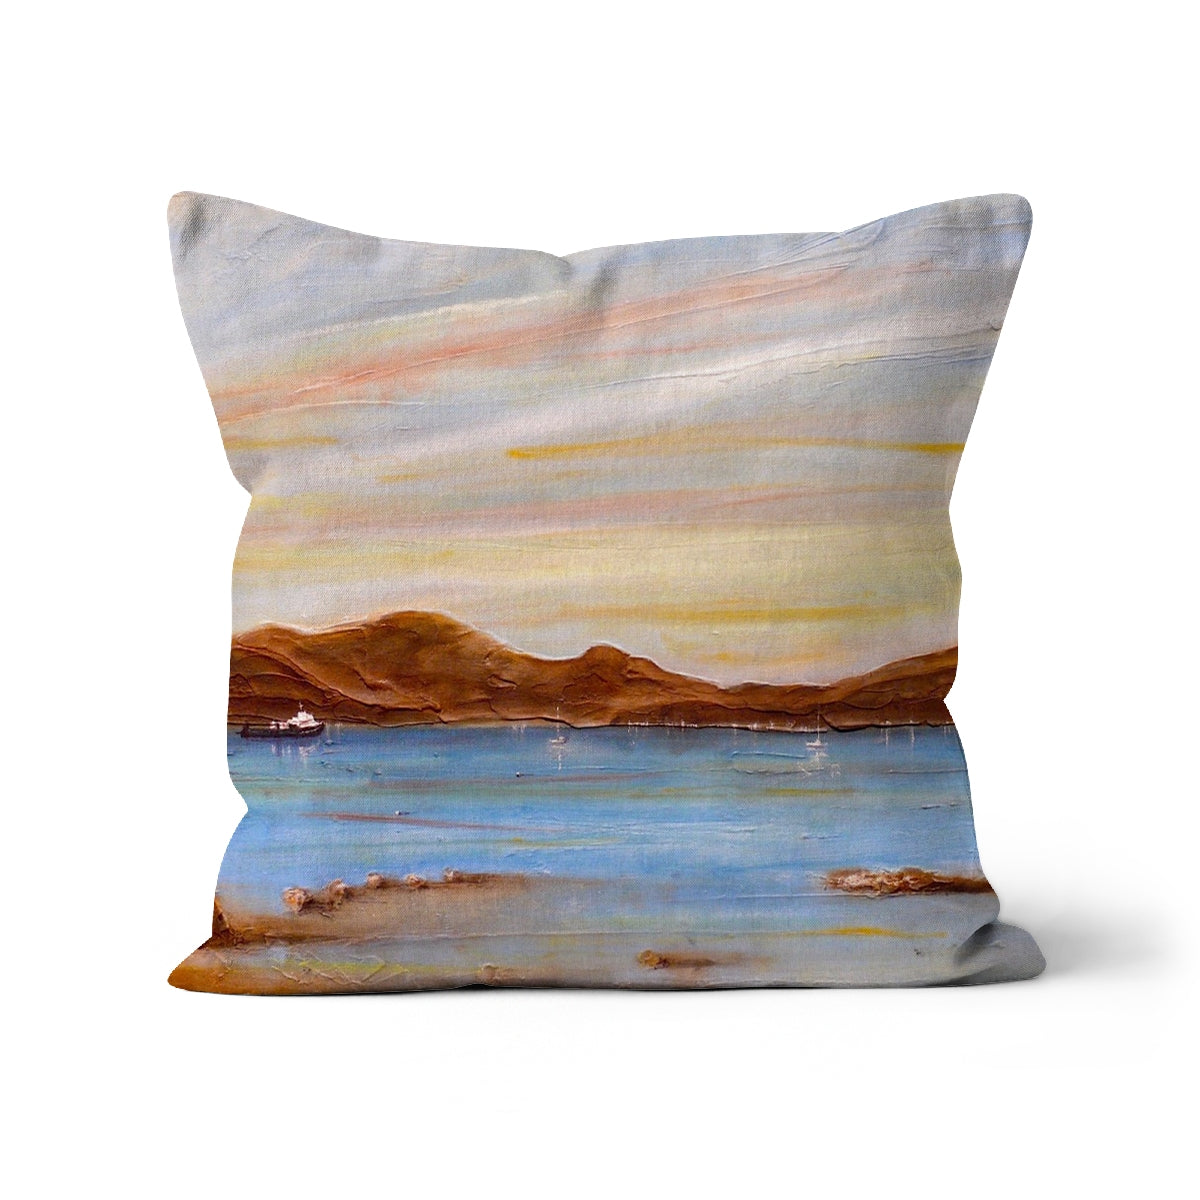 The Last Ferry To Dunoon Art Gifts Cushion-Cushions-River Clyde Art Gallery-Linen-22"x22"-Paintings, Prints, Homeware, Art Gifts From Scotland By Scottish Artist Kevin Hunter